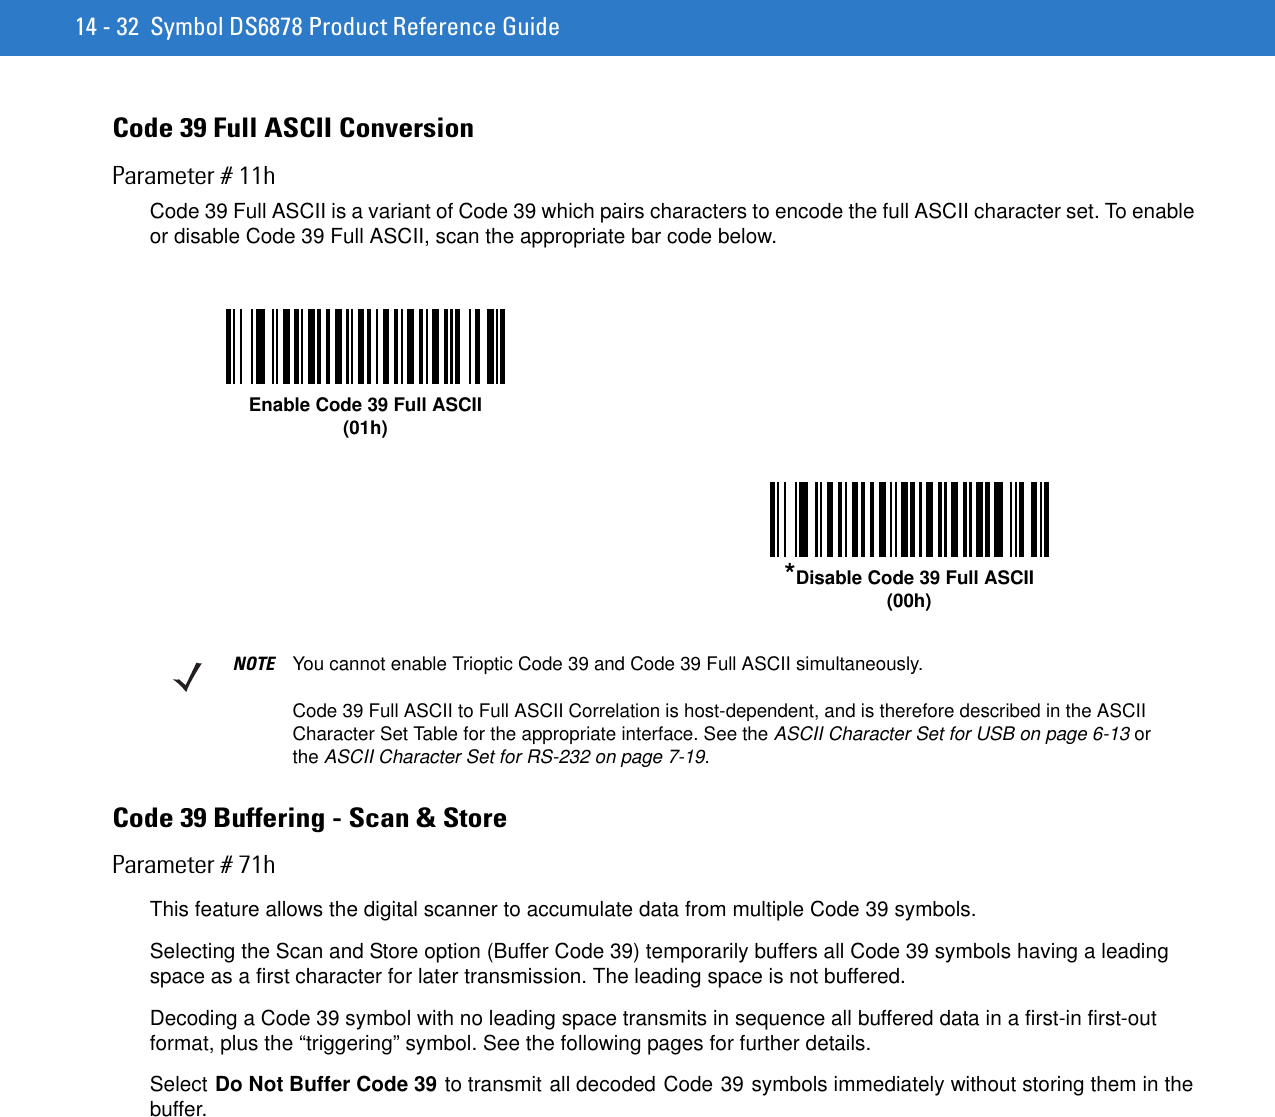 14 - 32 Symbol DS6878 Product Reference GuideCode 39 Full ASCII ConversionParameter # 11hCode 39 Full ASCII is a variant of Code 39 which pairs characters to encode the full ASCII character set. To enable or disable Code 39 Full ASCII, scan the appropriate bar code below. Code 39 Buffering - Scan &amp; StoreParameter # 71hThis feature allows the digital scanner to accumulate data from multiple Code 39 symbols.Selecting the Scan and Store option (Buffer Code 39) temporarily buffers all Code 39 symbols having a leading space as a first character for later transmission. The leading space is not buffered.Decoding a Code 39 symbol with no leading space transmits in sequence all buffered data in a first-in first-out format, plus the “triggering” symbol. See the following pages for further details.Select Do Not Buffer Code 39 to transmit all decoded Code 39 symbols immediately without storing them in the buffer.Enable Code 39 Full ASCII(01h)*Disable Code 39 Full ASCII(00h)NOTE You cannot enable Trioptic Code 39 and Code 39 Full ASCII simultaneously. Code 39 Full ASCII to Full ASCII Correlation is host-dependent, and is therefore described in the ASCII Character Set Table for the appropriate interface. See the ASCII Character Set for USB on page 6-13 or the ASCII Character Set for RS-232 on page 7-19.